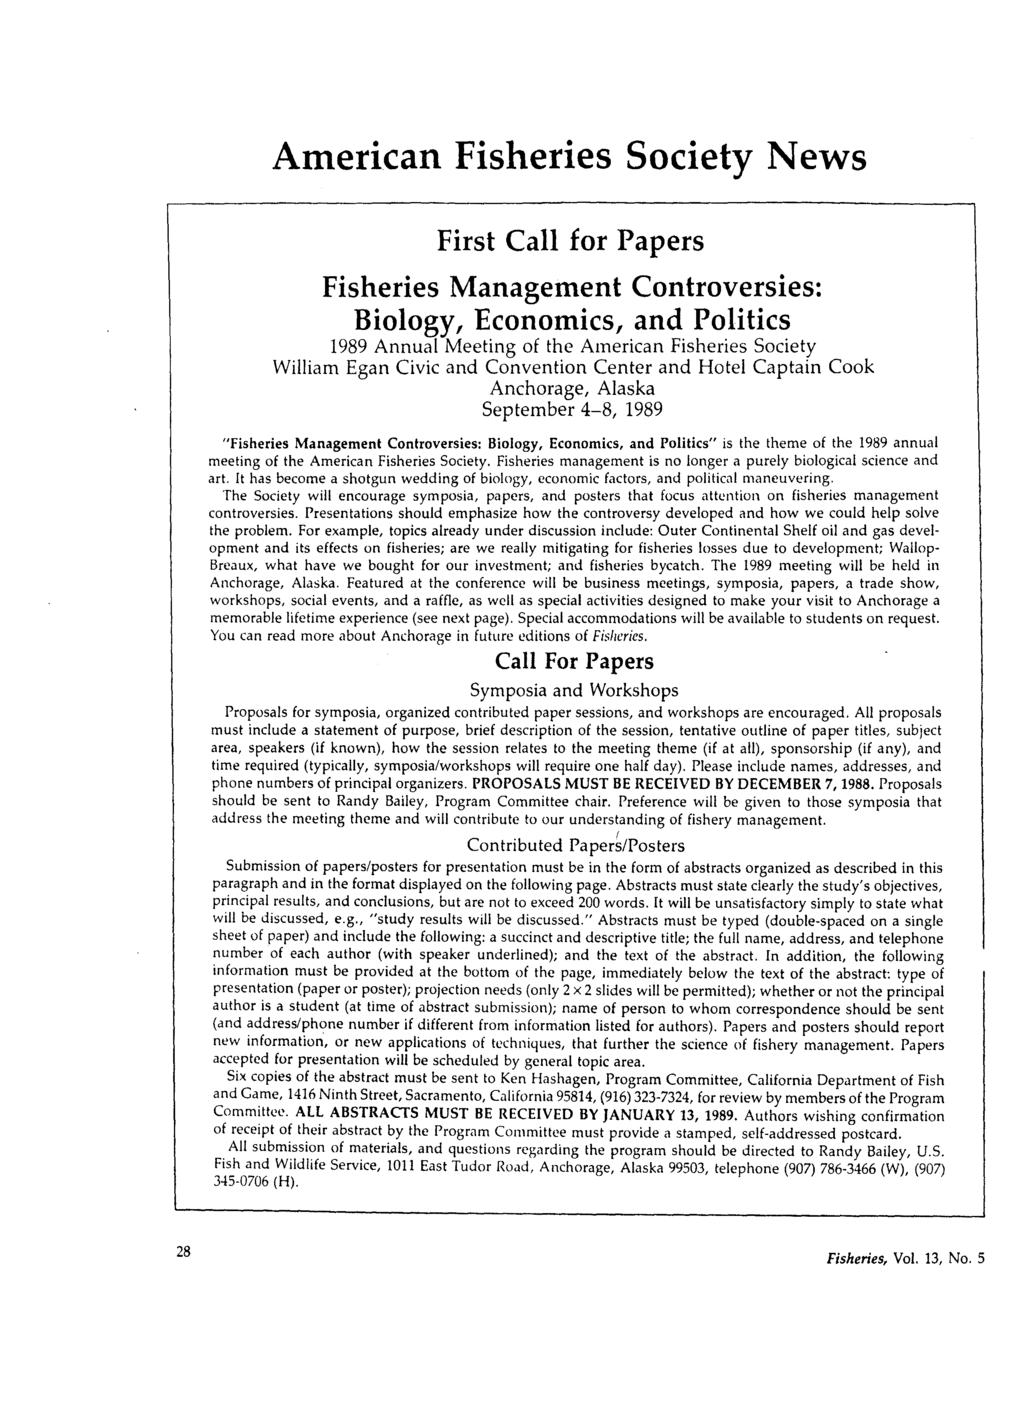 American Fisheries Society News First Call for Papers Fisheries Management Controversies: Biology, Economics, and Politics 1989 Annual Meeting of the American Fisheries Society William Egan Civic and